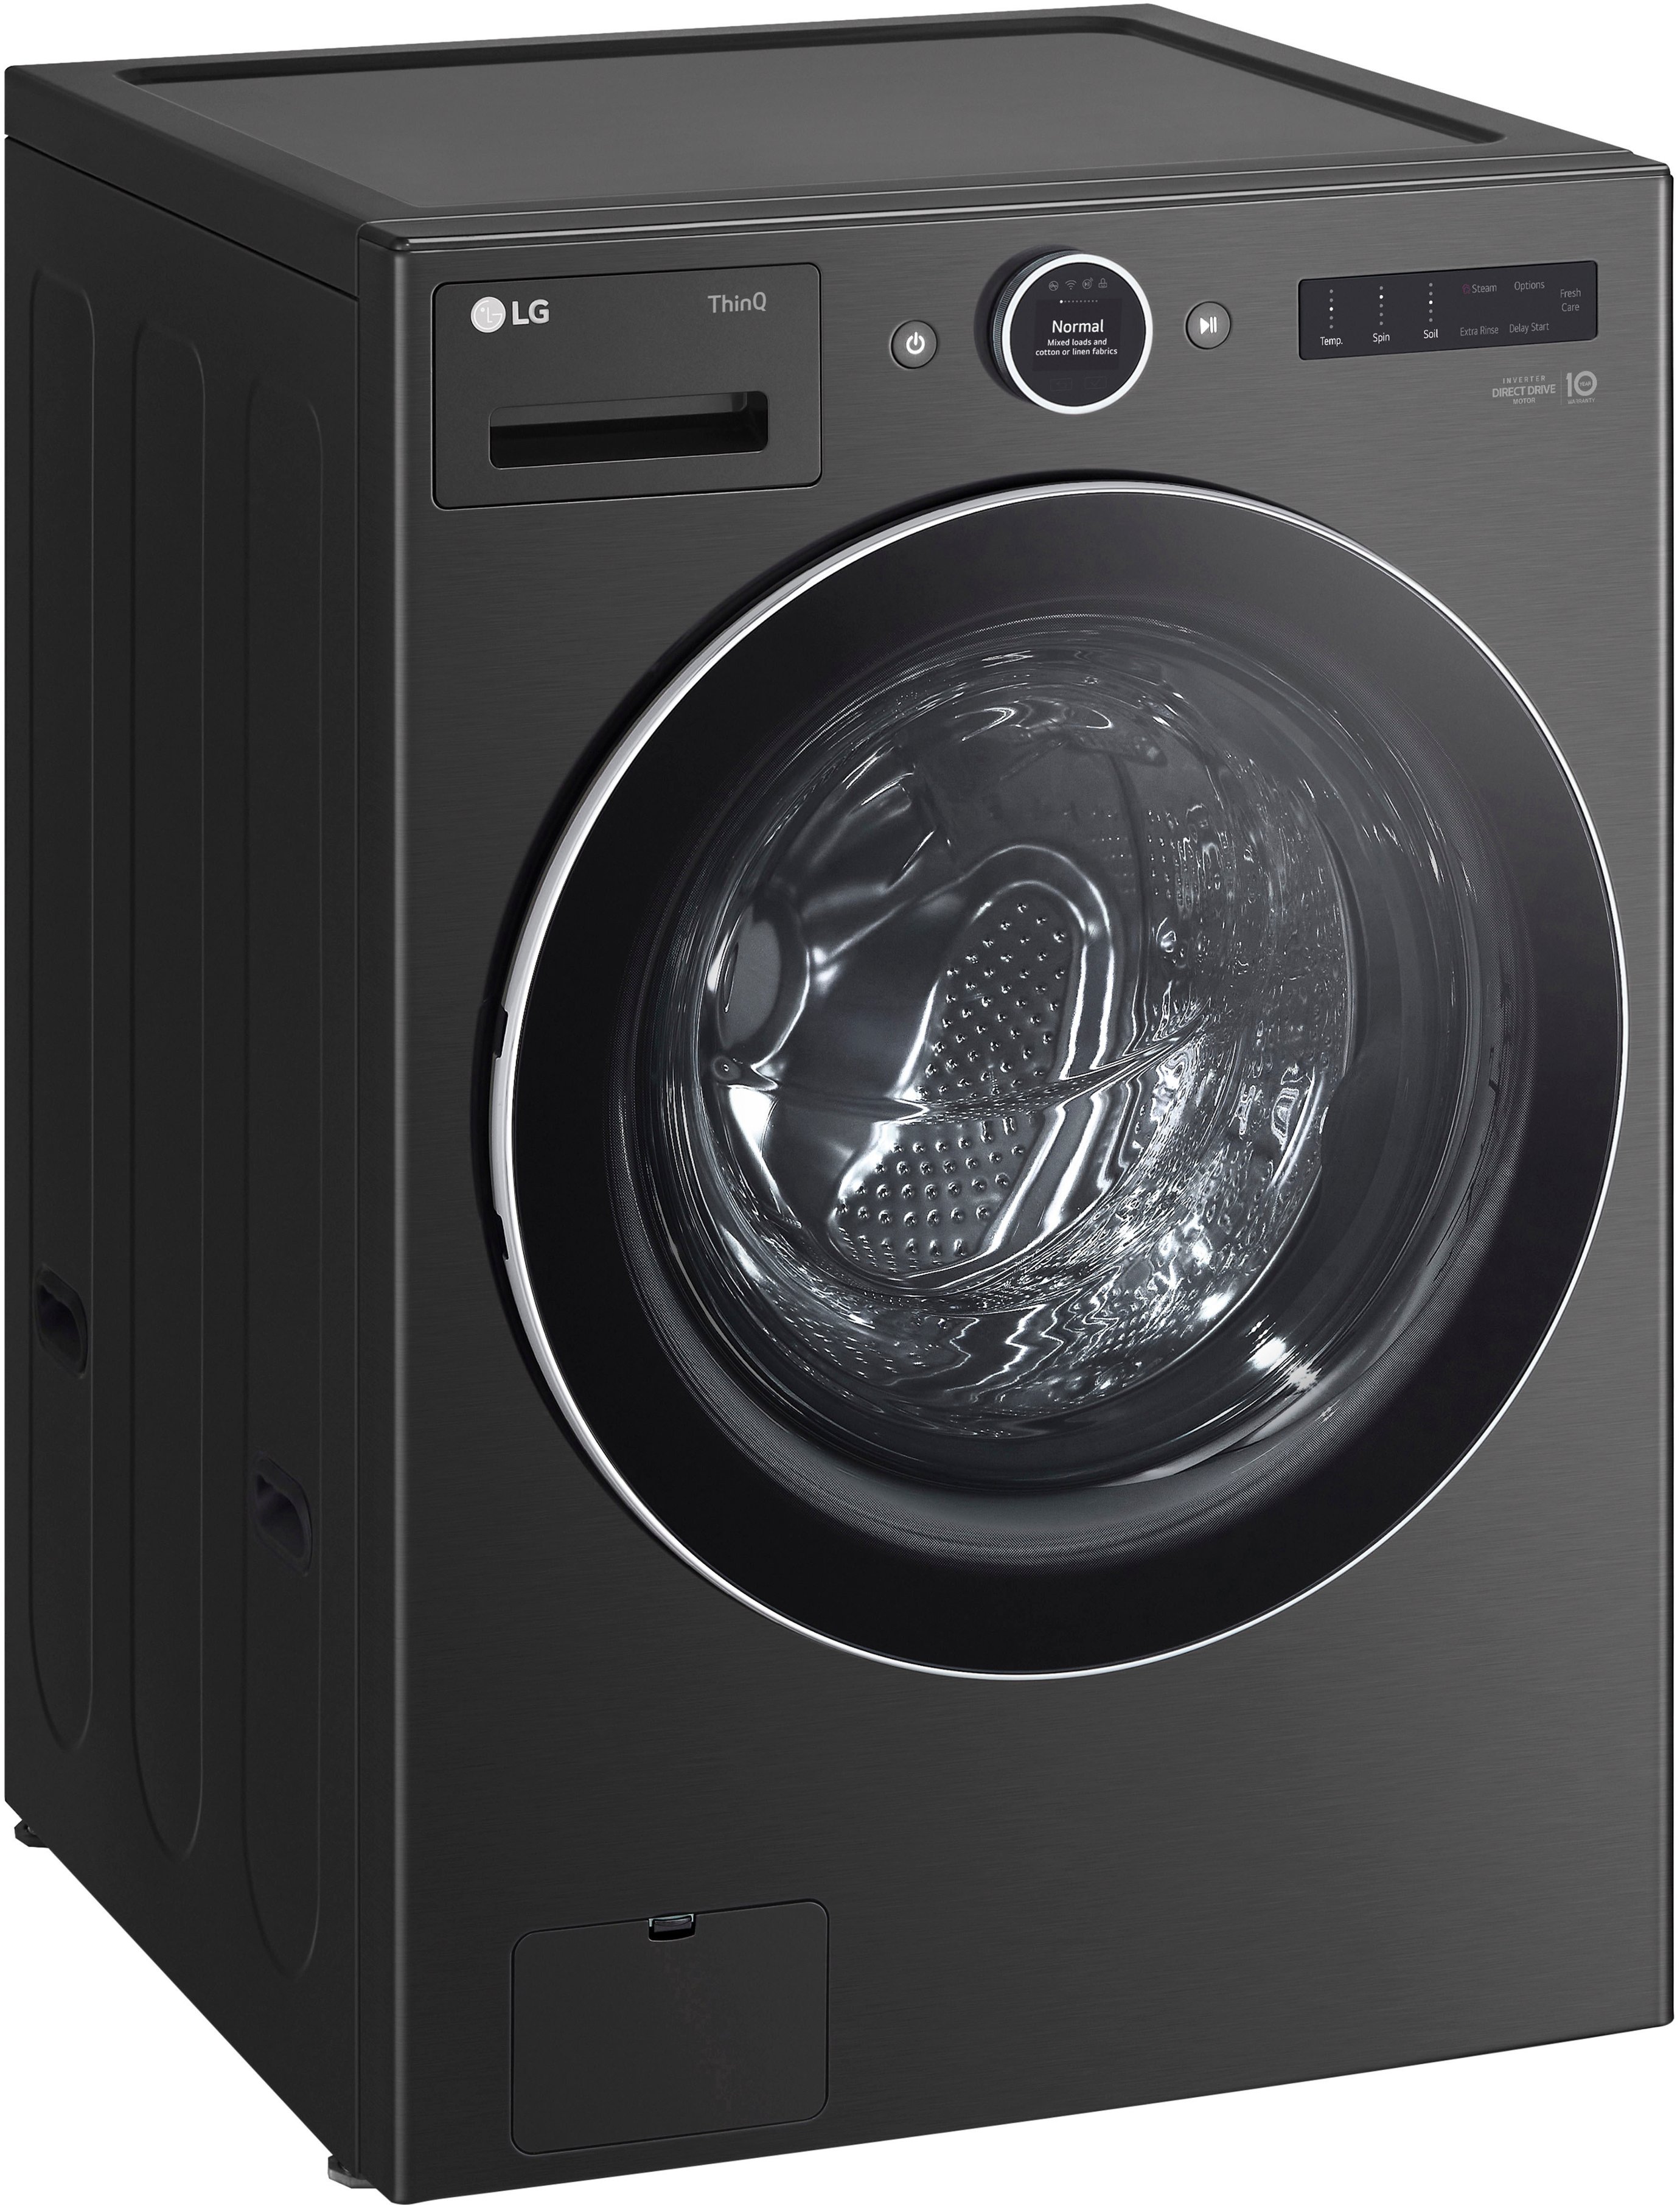 Angle View: Maytag - 4.5 Cu. Ft. High Efficiency Stackable Front Load Washer with Steam and Extra Power Button - Volcano Black